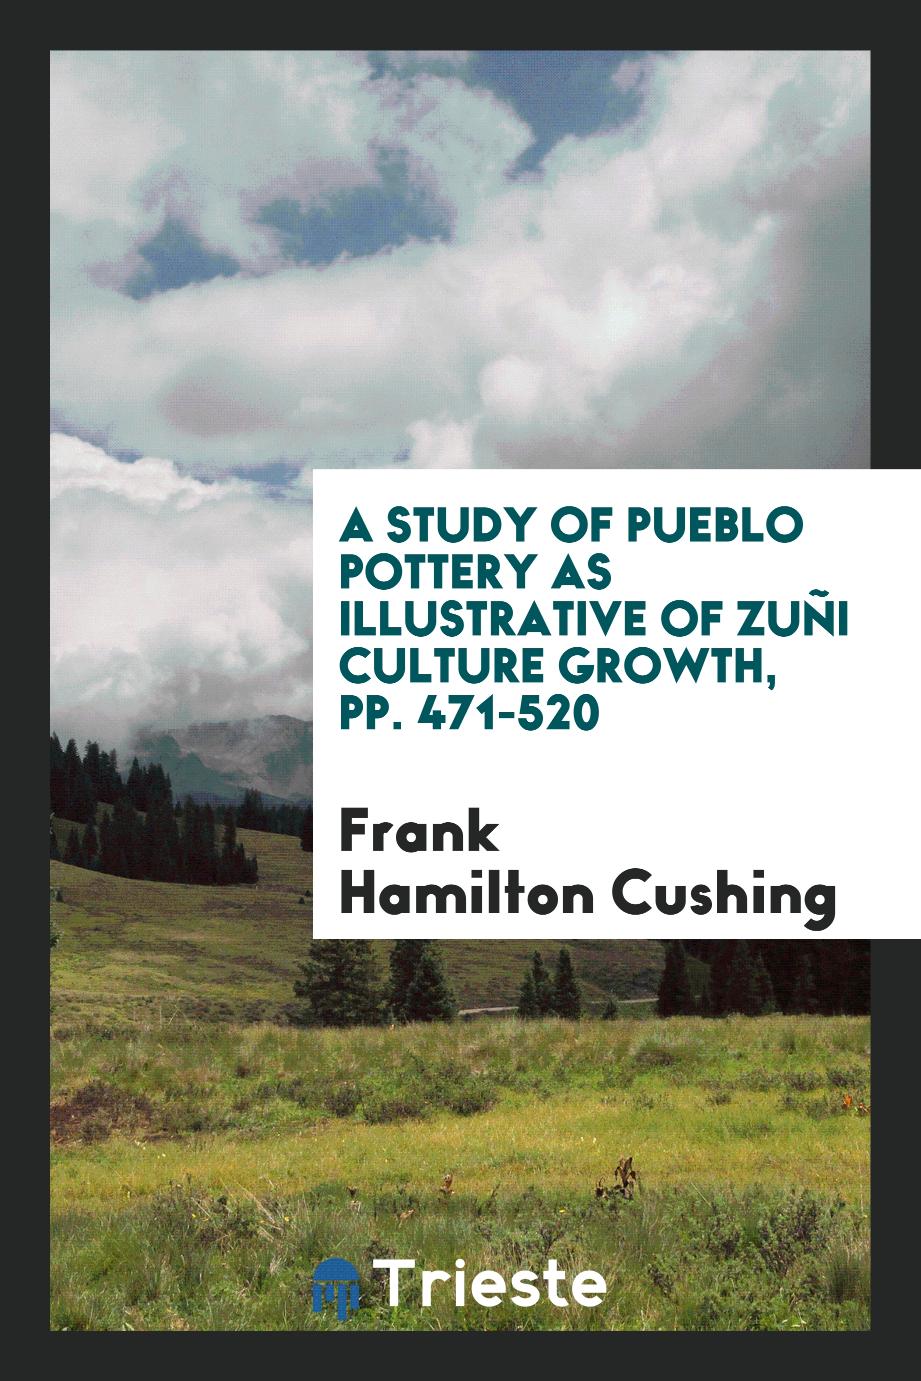 A study of Pueblo pottery as illustrative of Zuñi culture growth, pp. 471-520